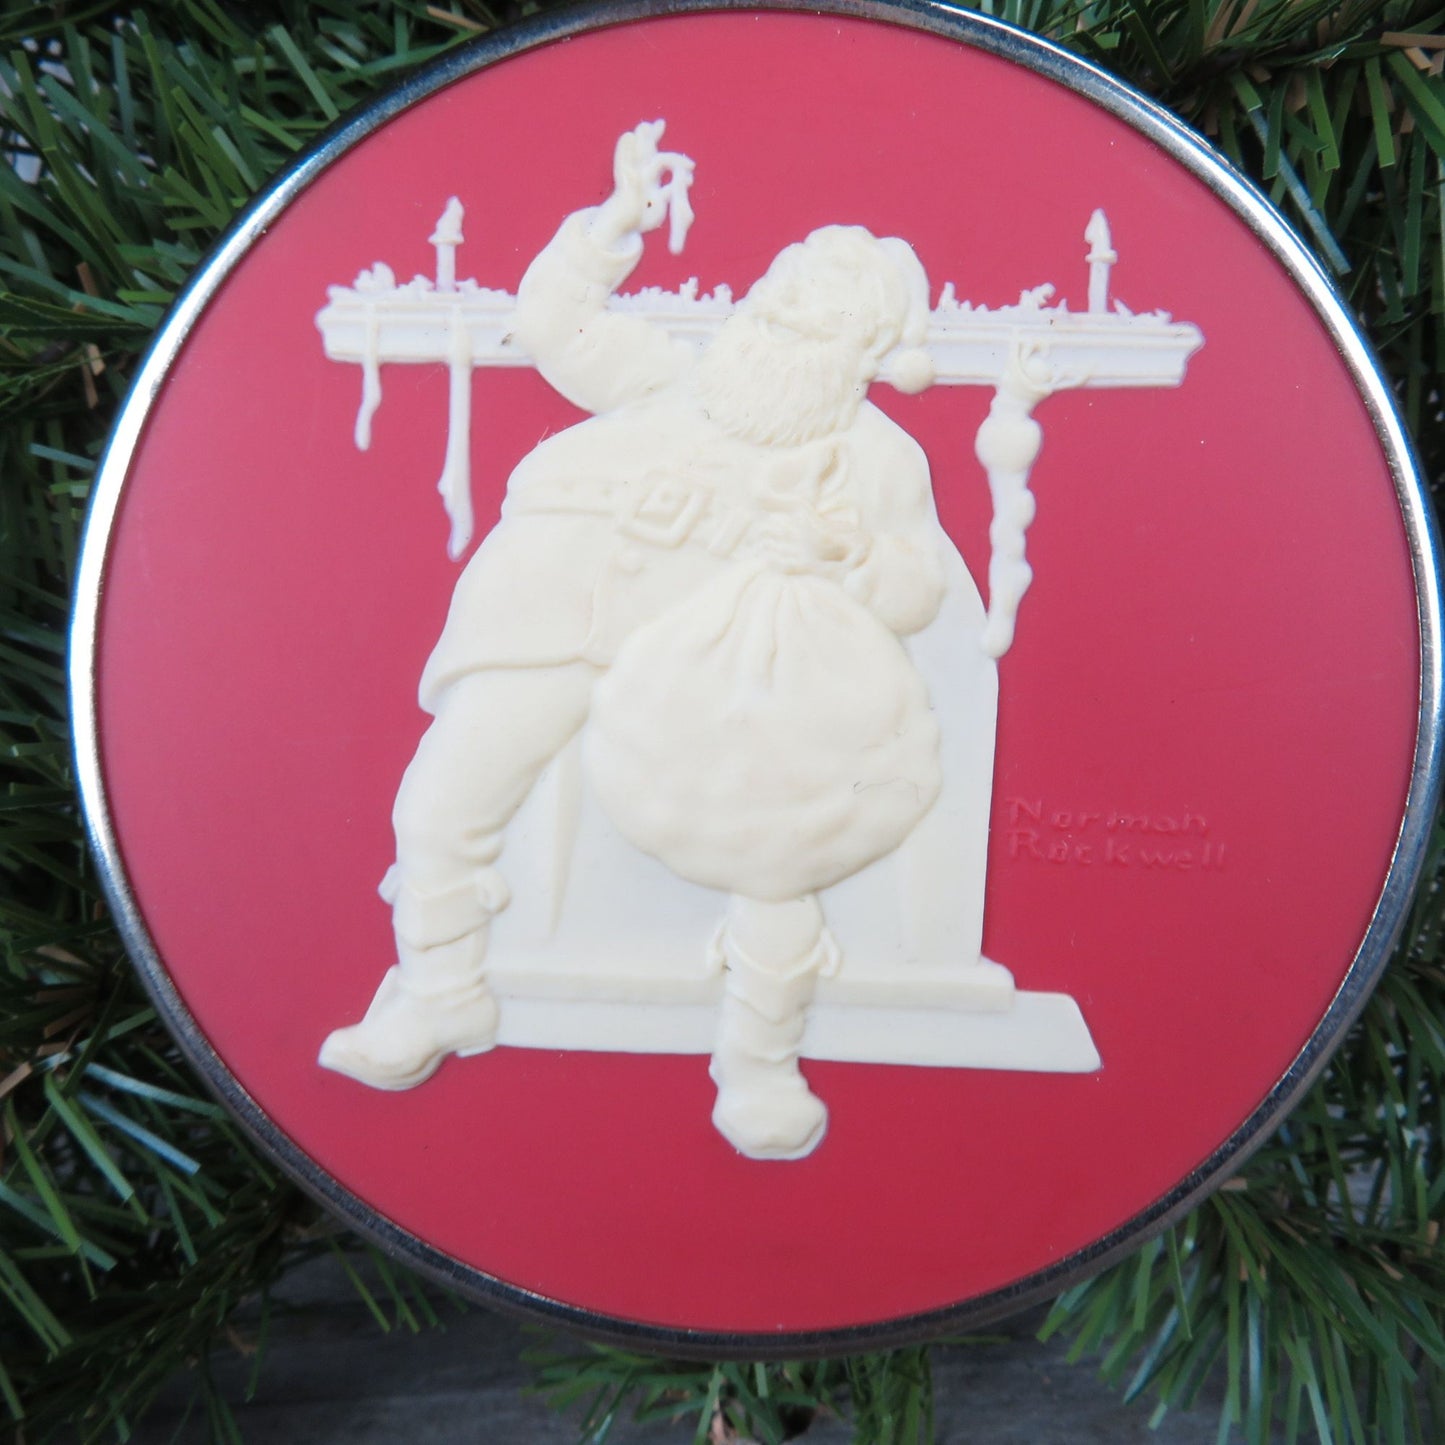 Vintage Santa Claus Christmas Cameo Ornament Norman Rockwell Filling the Stocking Collection Hallmark 1982